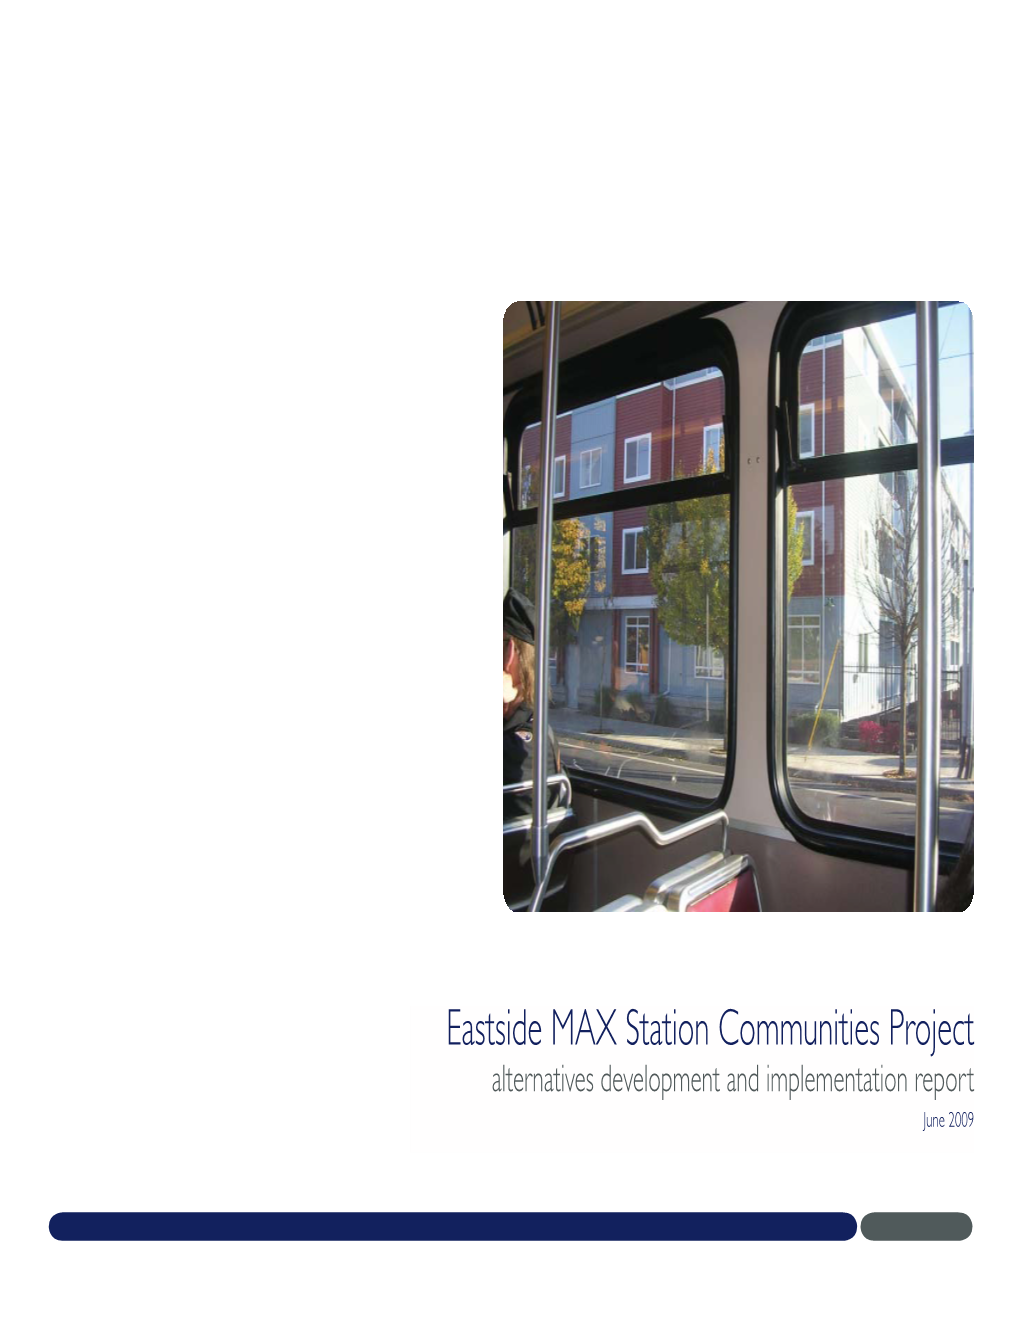 Eastside MAX Station Communities Project Alternatives Development and Implementation Report June 2009